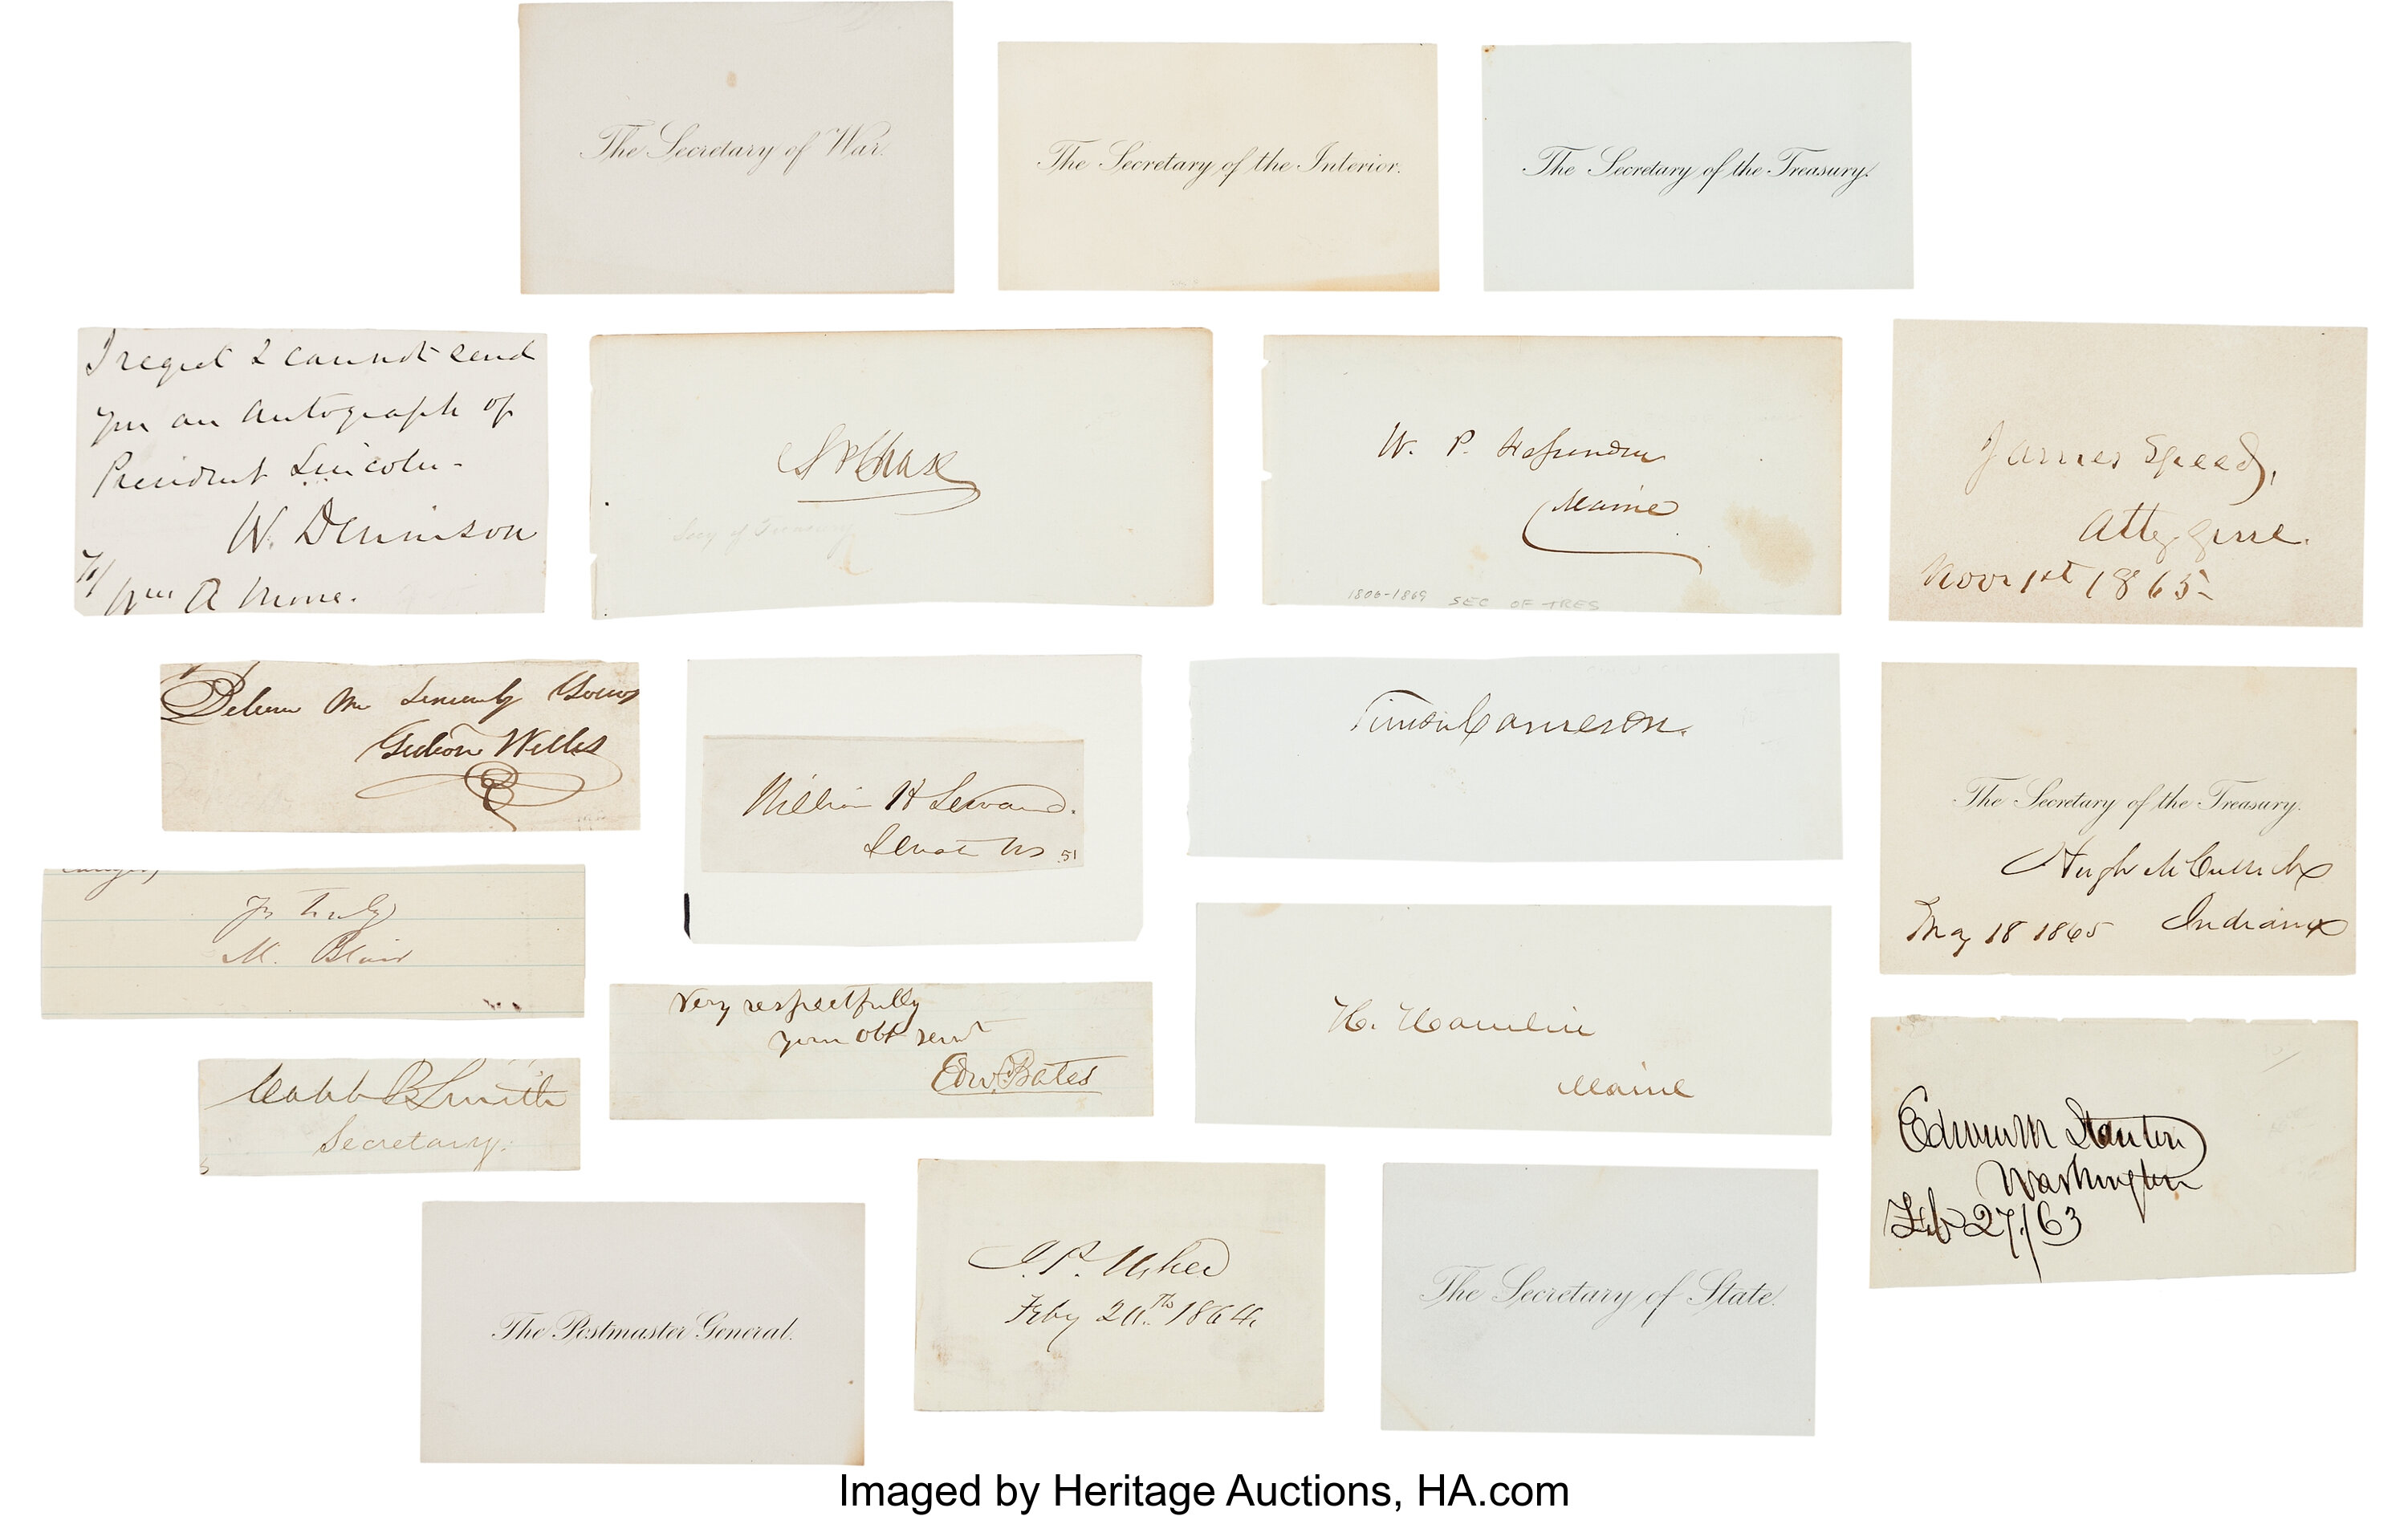 Abraham Lincoln Cabinet Member Autographs Total 24 Items